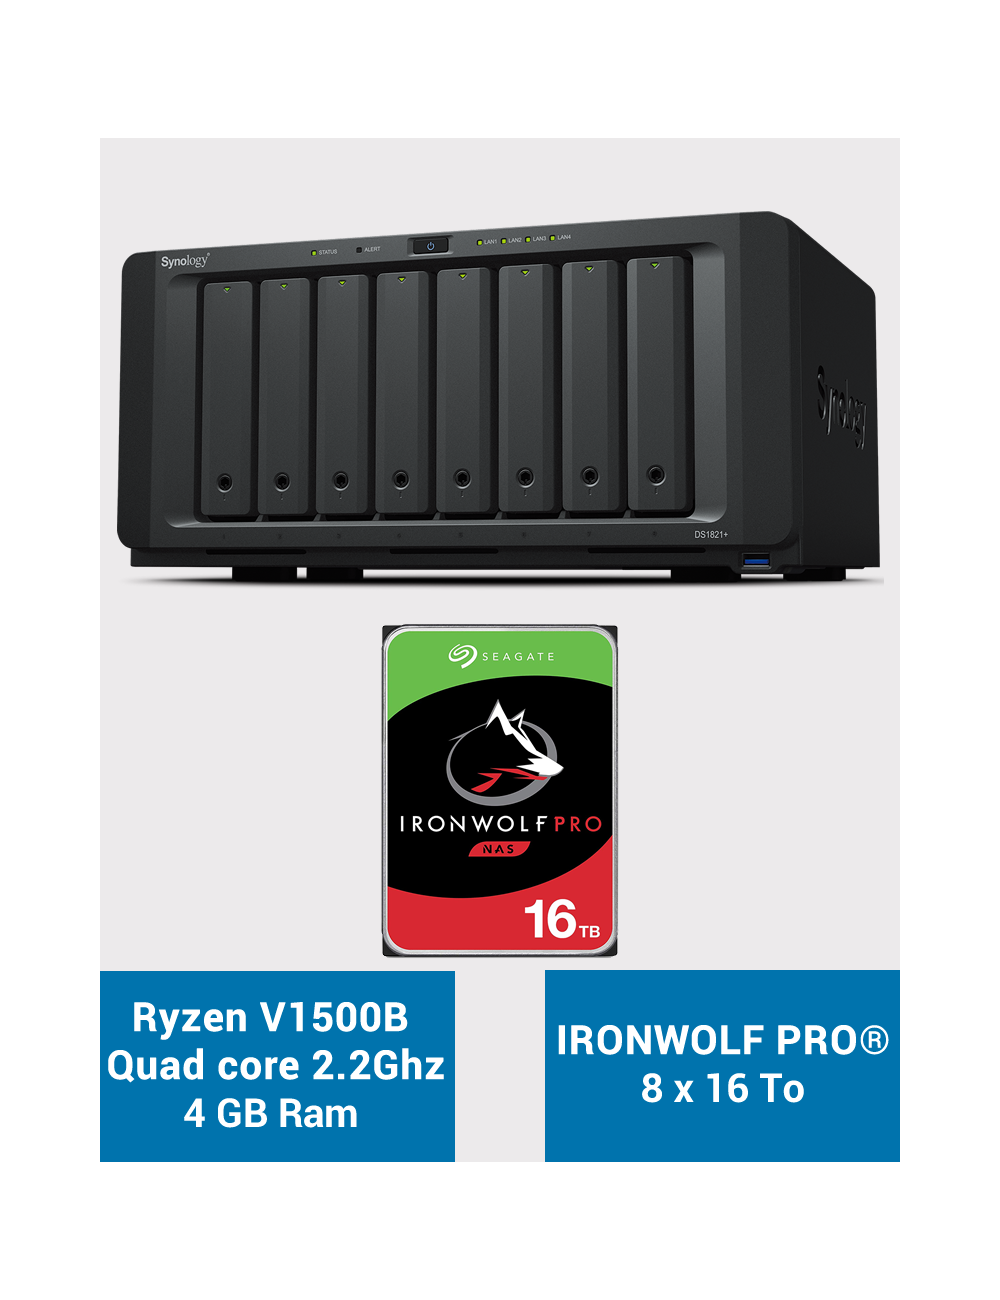 Synology DS1821+ Serveur NAS 8 baies IRONWOLF PRO 128To (8x16To)